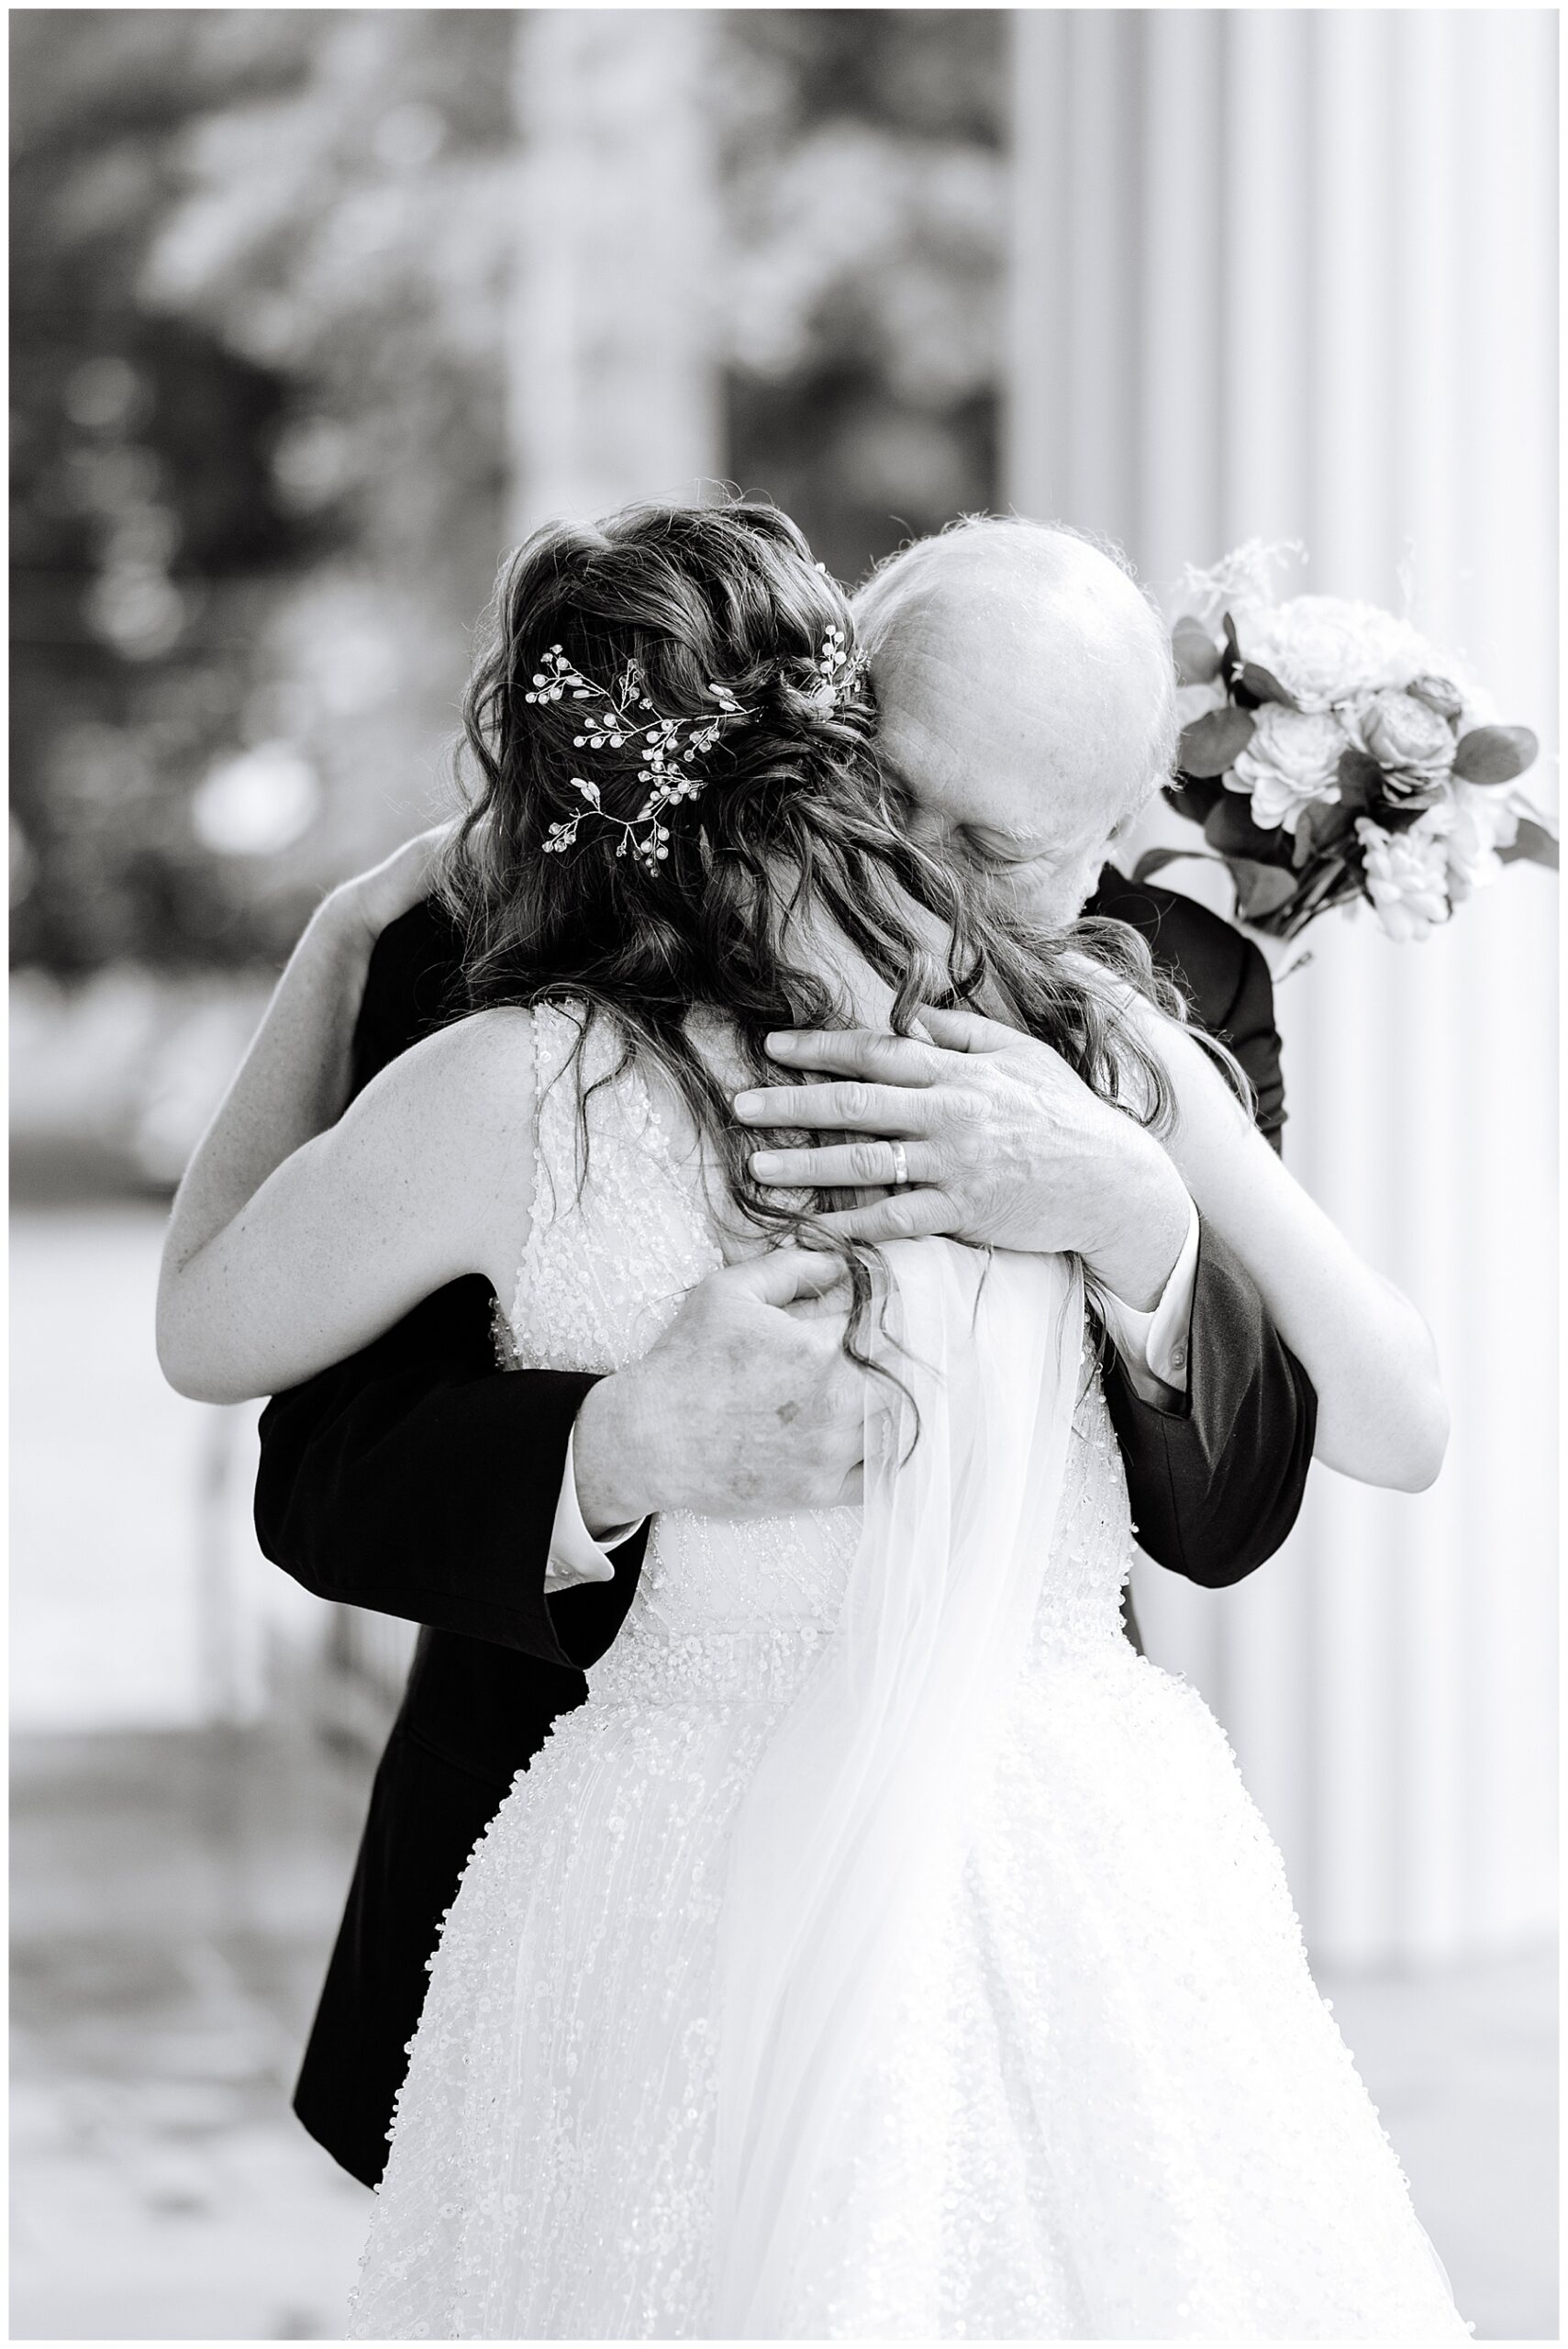 Charlotte wedding photographer captures bride hugging family member during emotional first look at a wedding.